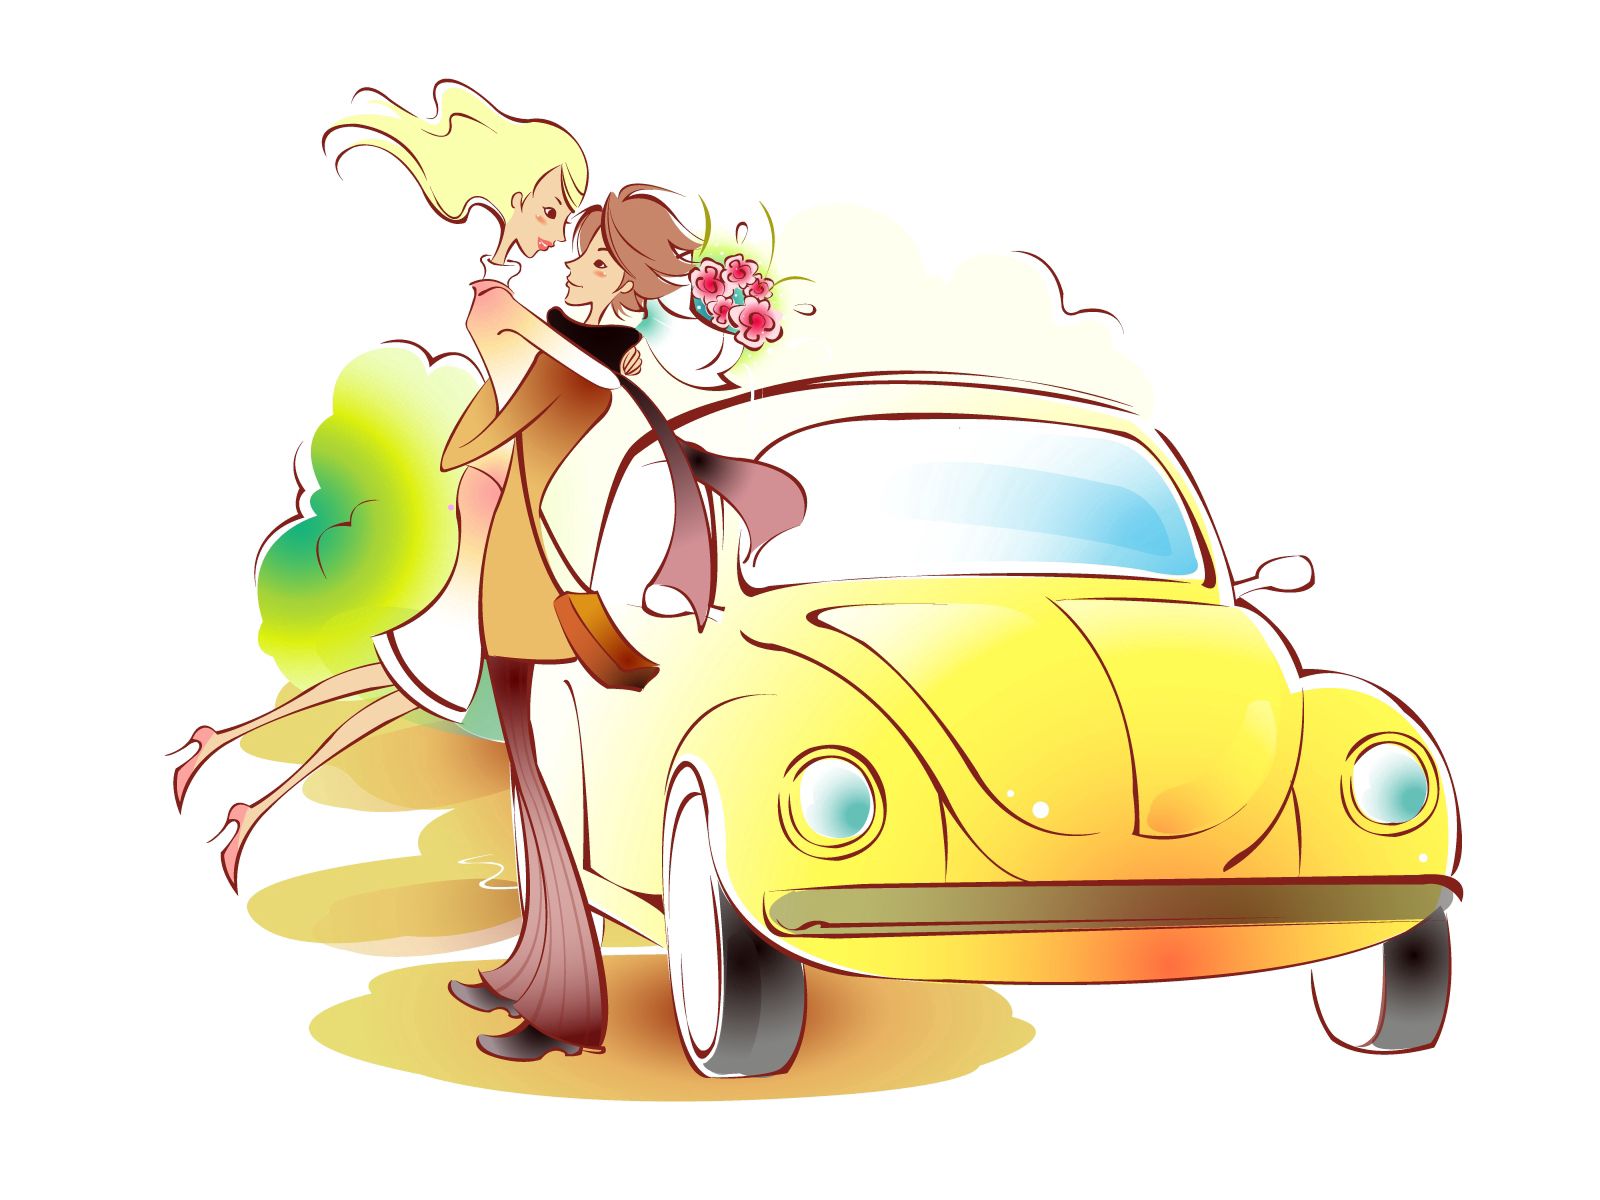 pair, flowers, art, love, couple, car, picture, drawing, embrace, meeting